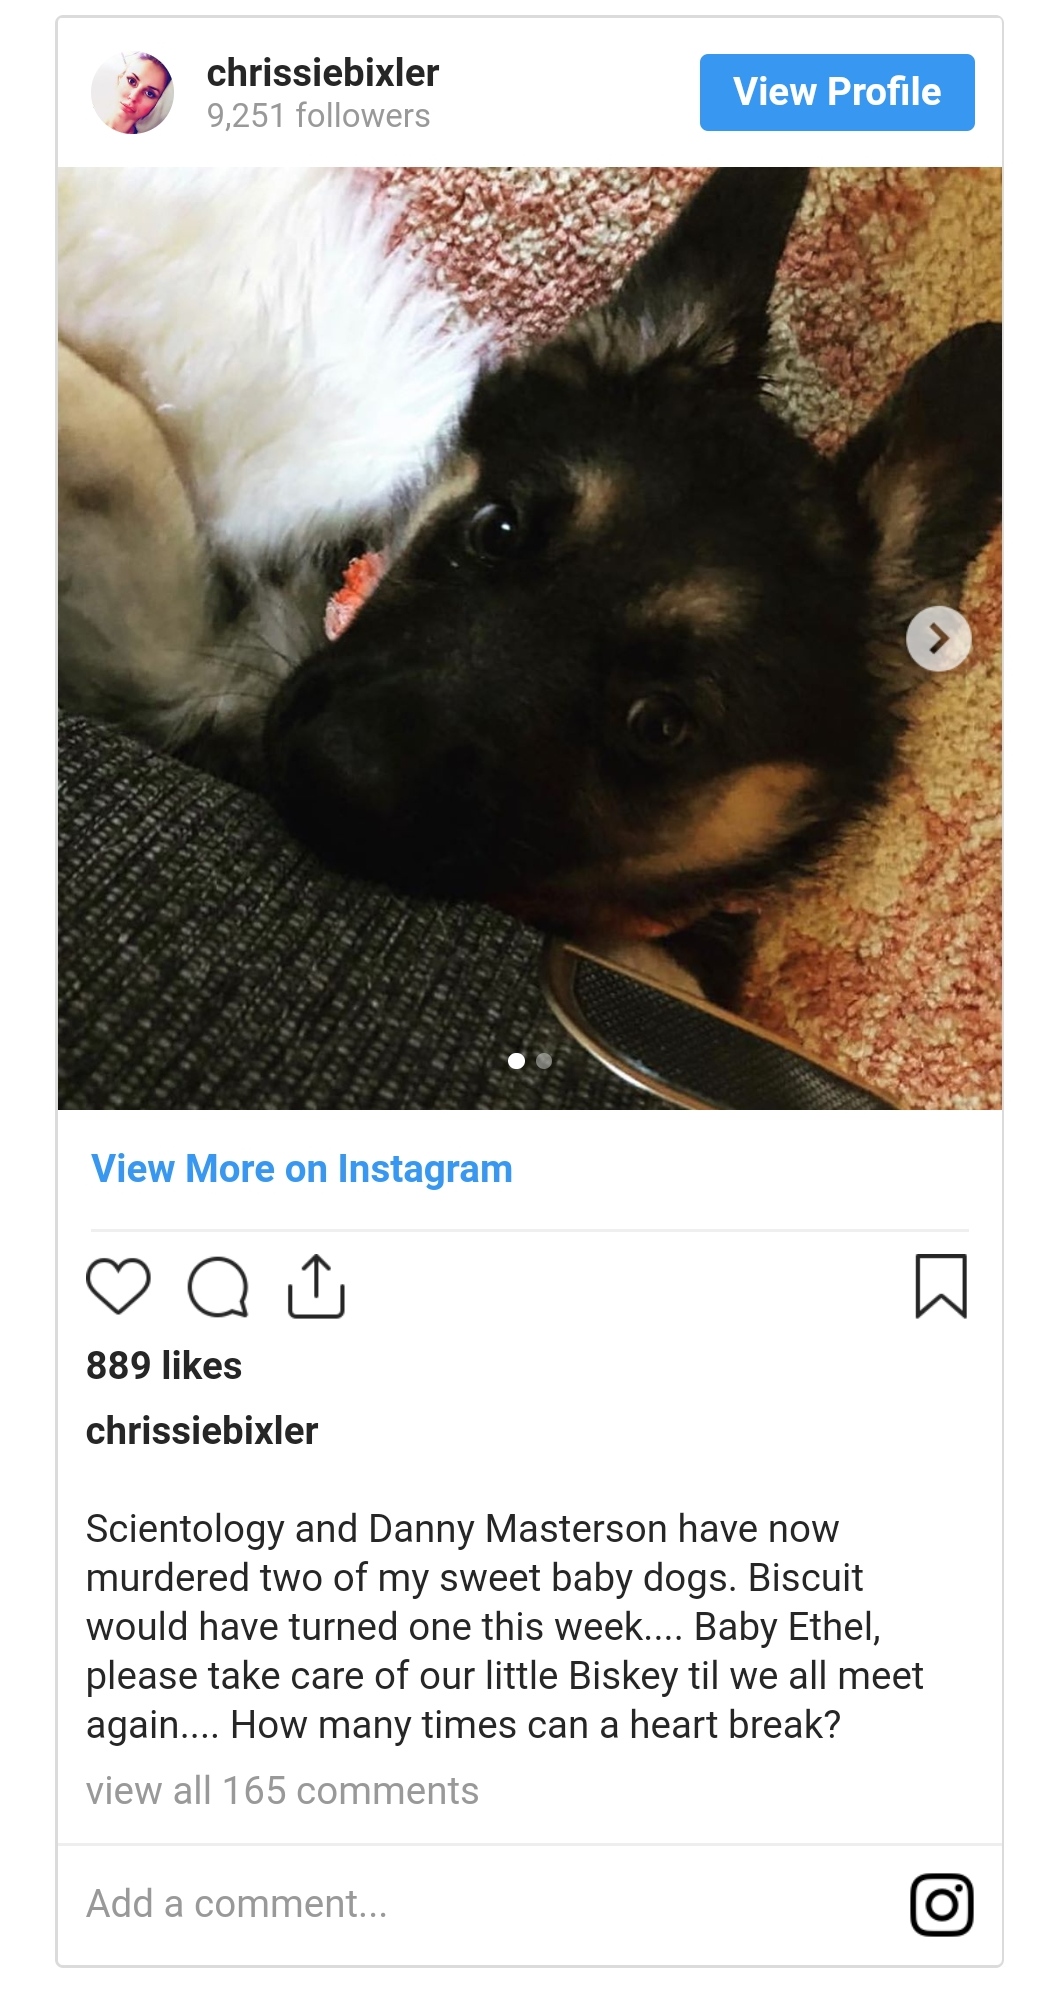 photo caption - chrissiebixler 0251 ers View Profile View More on Instagram Qu 889 chrissiebixler Scientology and Danny Masterson have now murdered two of my sweet baby dogs. Biscuit would have turned one this week.... Baby Ethel, please take care of our 